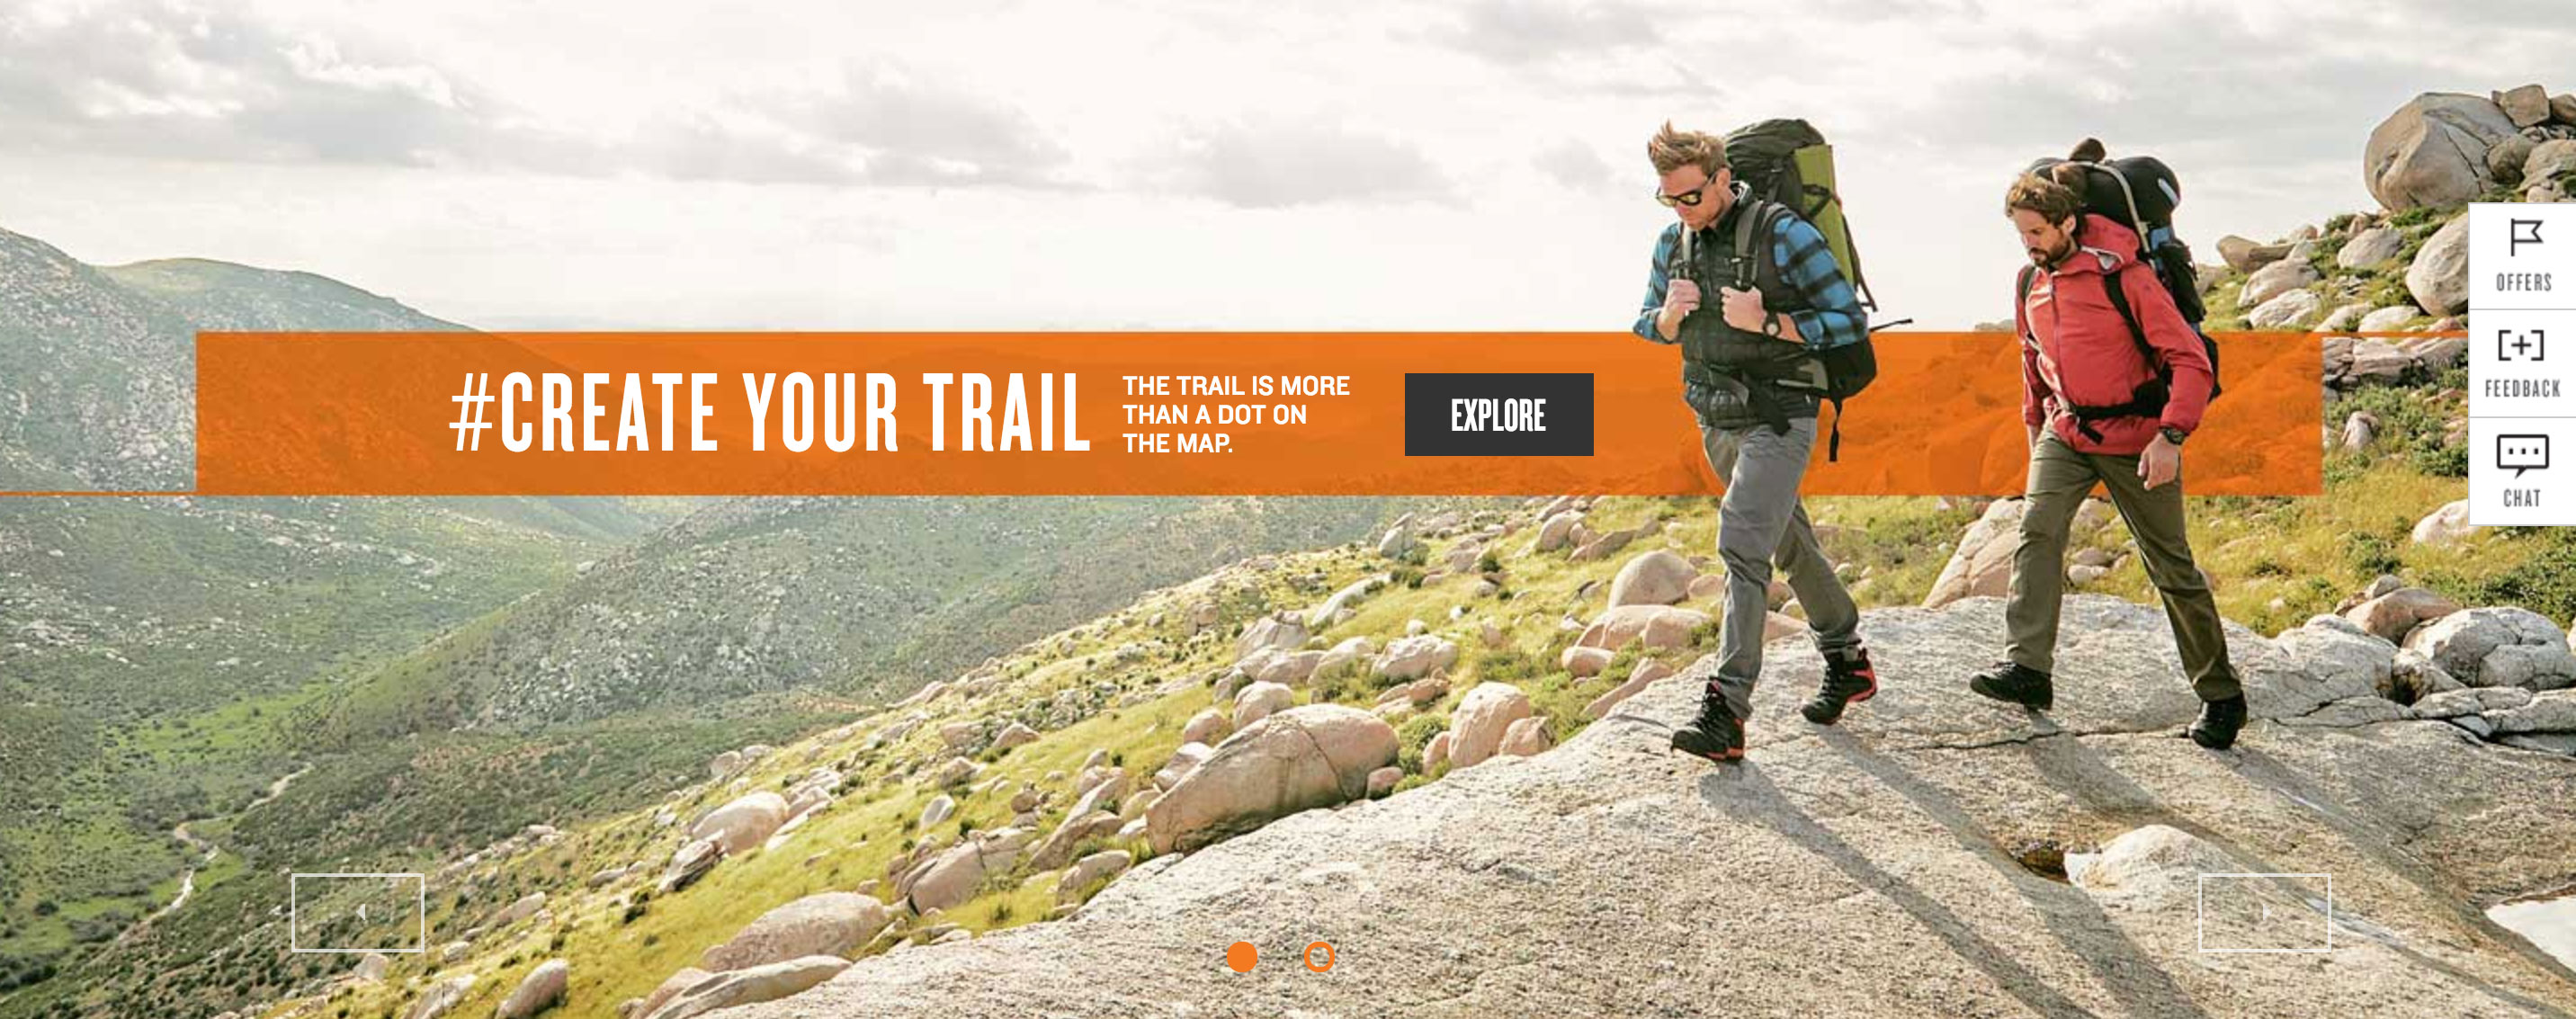 Merrell #createyourtrail Campaign shot by Andrew Maguire